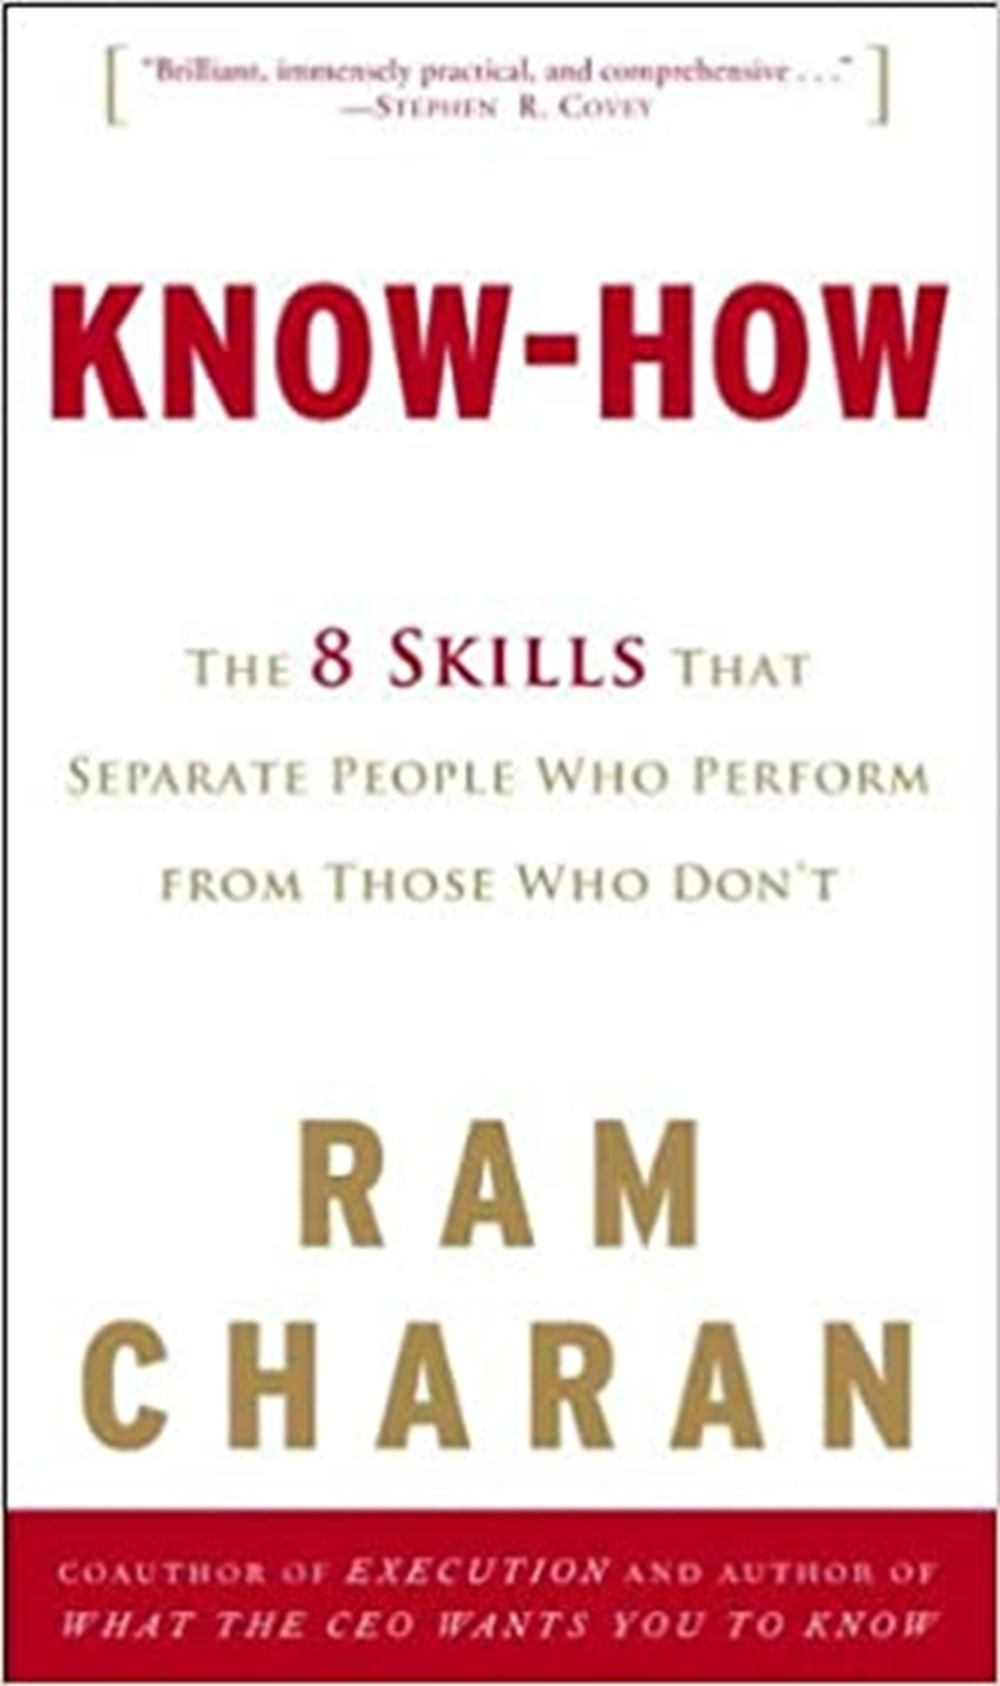 Know-How The 8 Skills That Separate People Who Perform from Those Who Don't